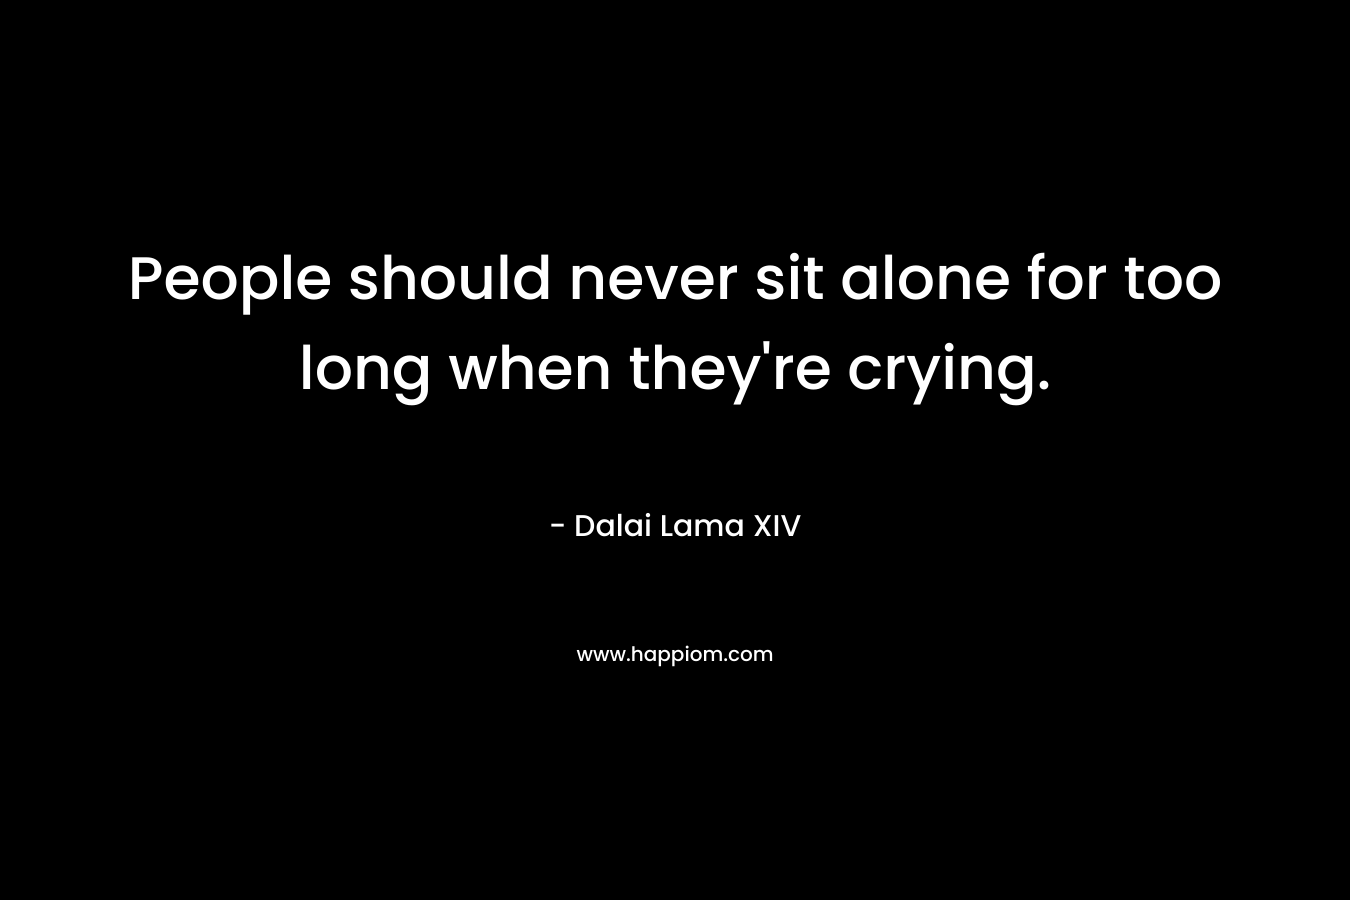 People should never sit alone for too long when they're crying.